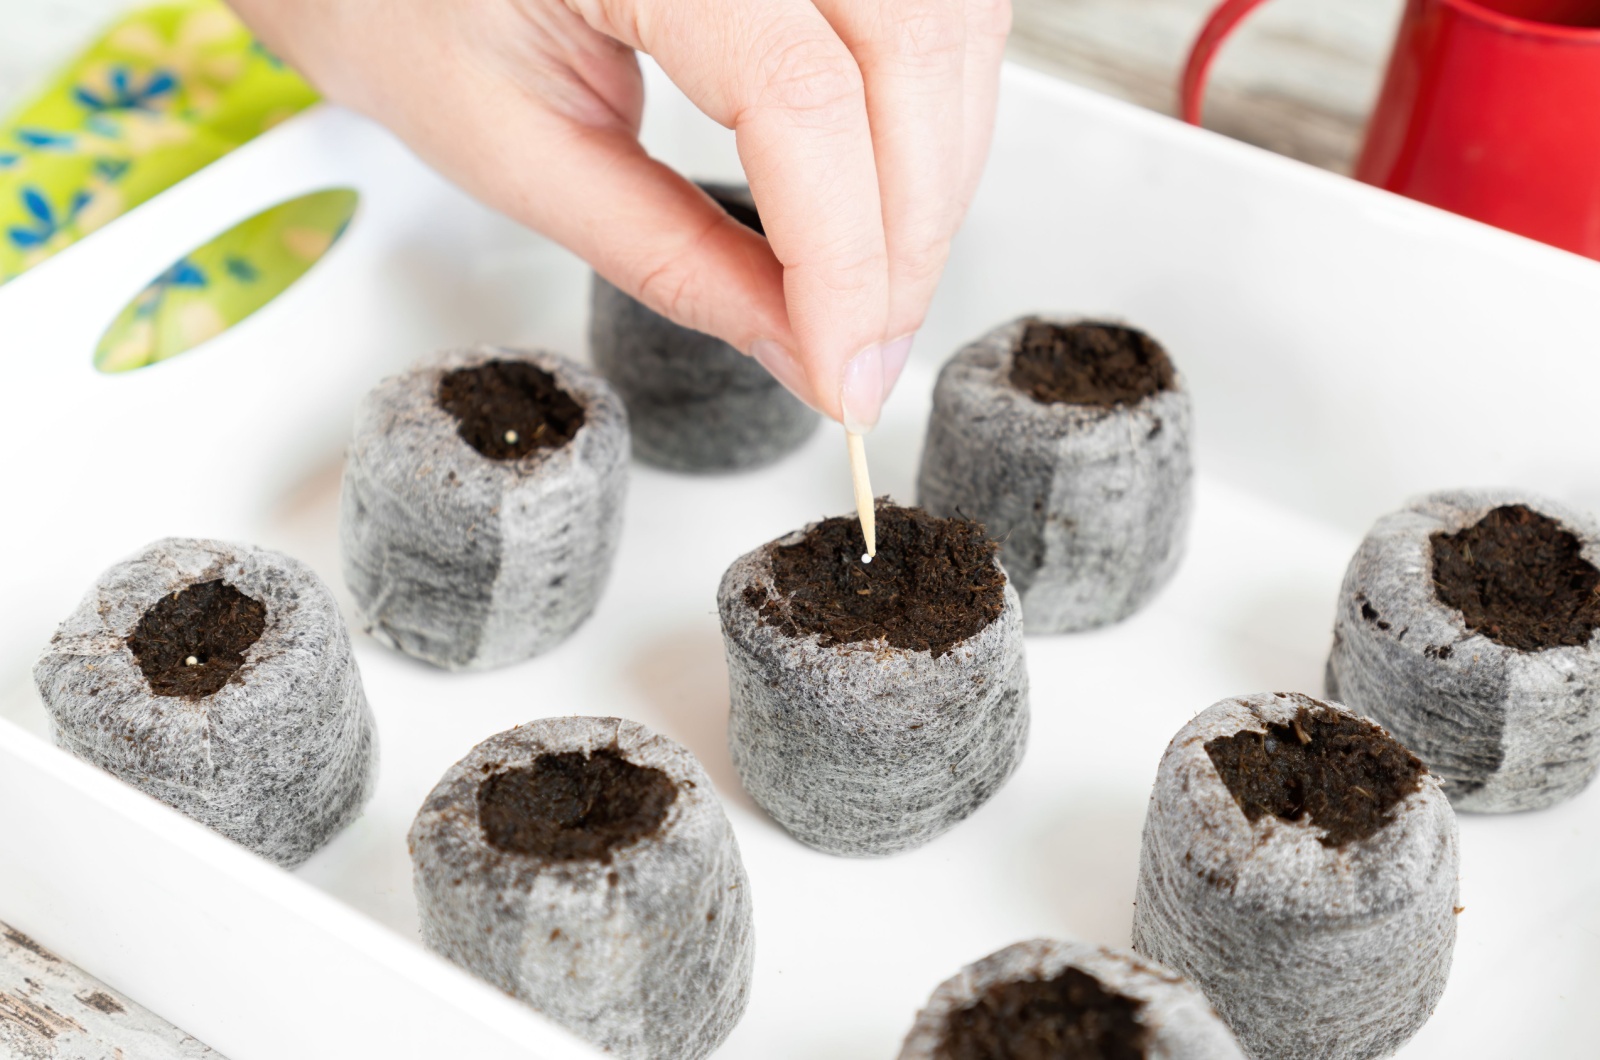 Planting seeds in peat pellets using a wet toothpick